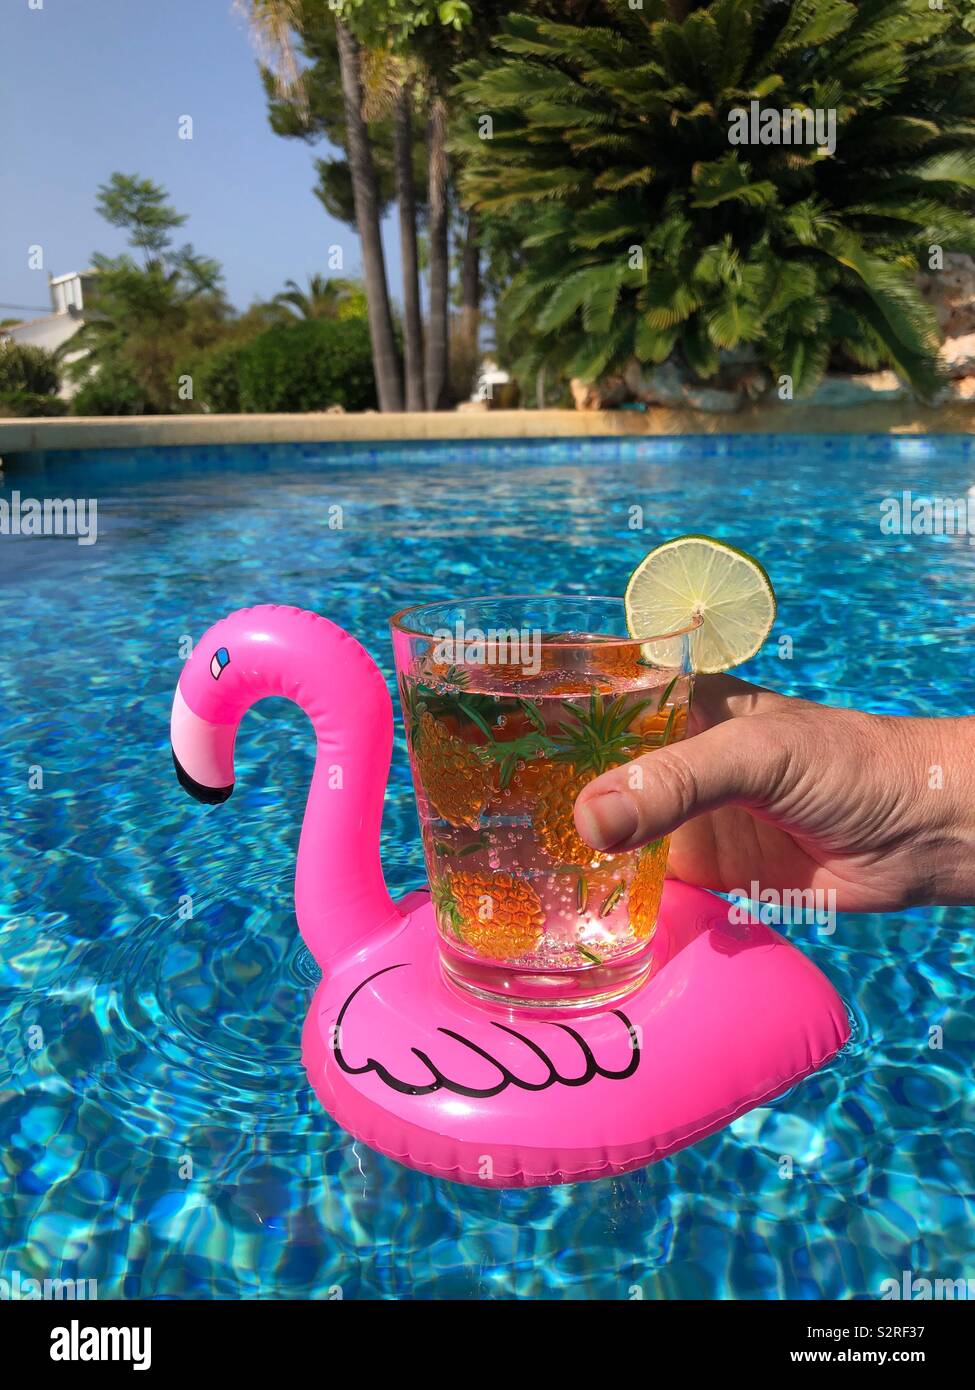 Hand holding a drink floating on inflatable pink flamingo drink holder in swimming pool Stock Photo